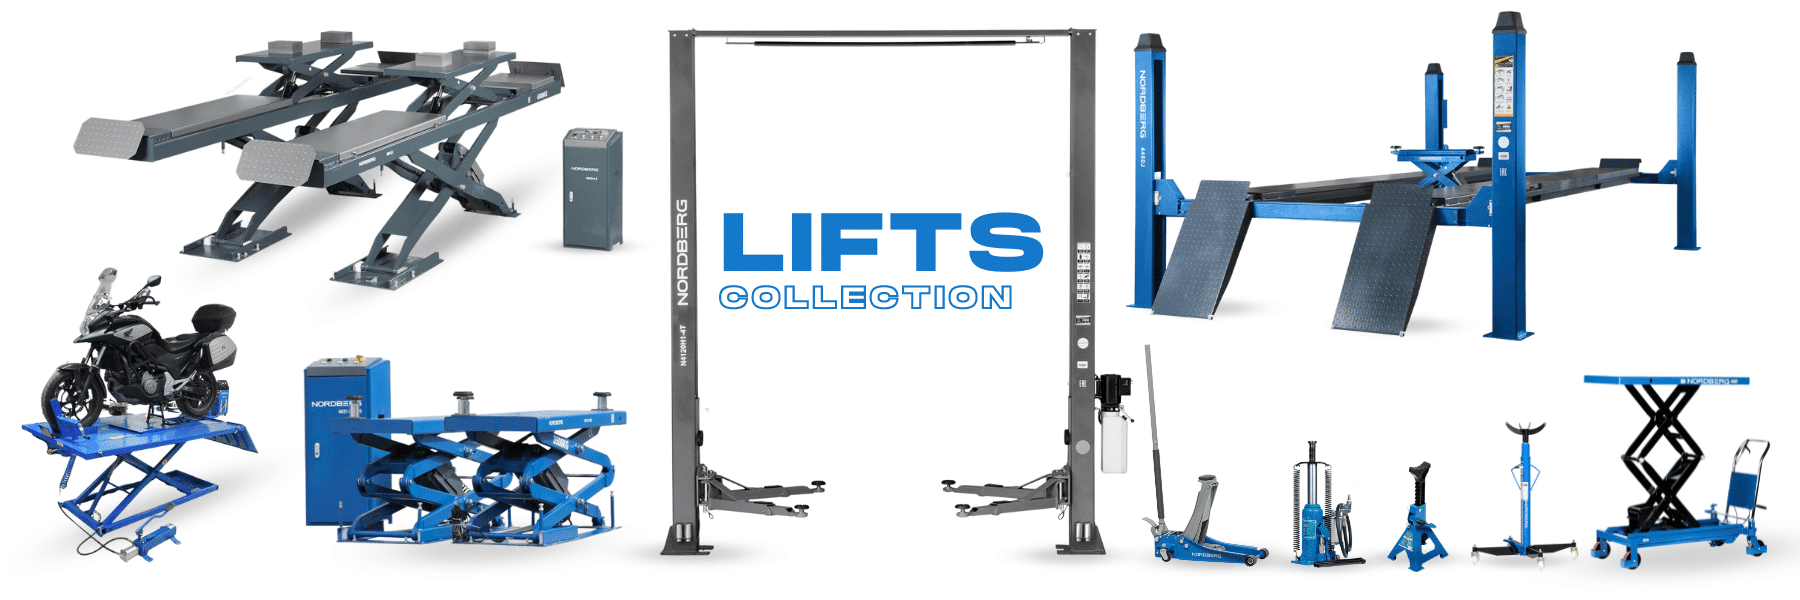 Lift NORDBERG Collection main